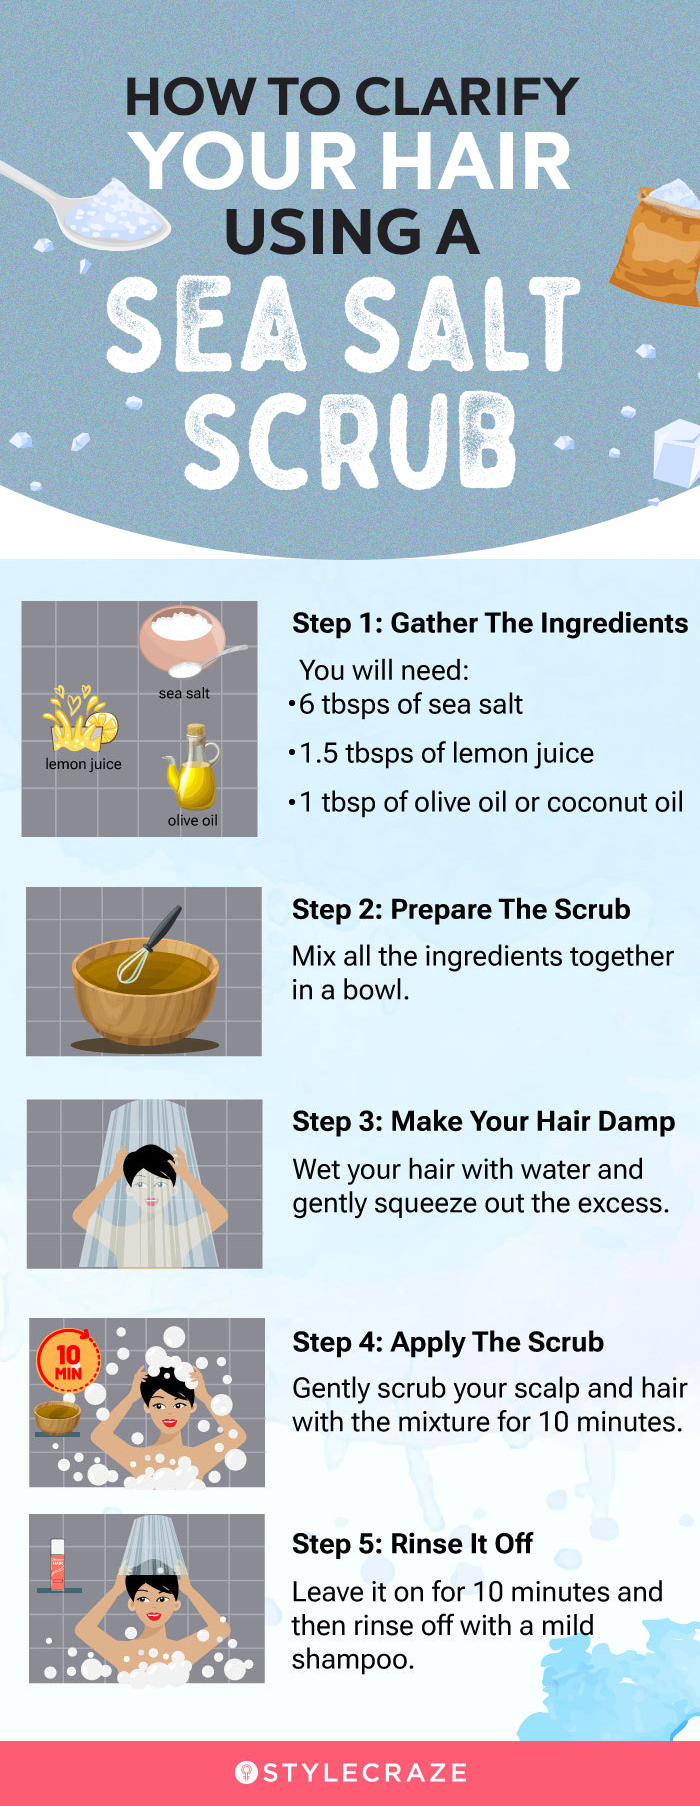 how to clarify your hair using a sea salt scrub (infographic)